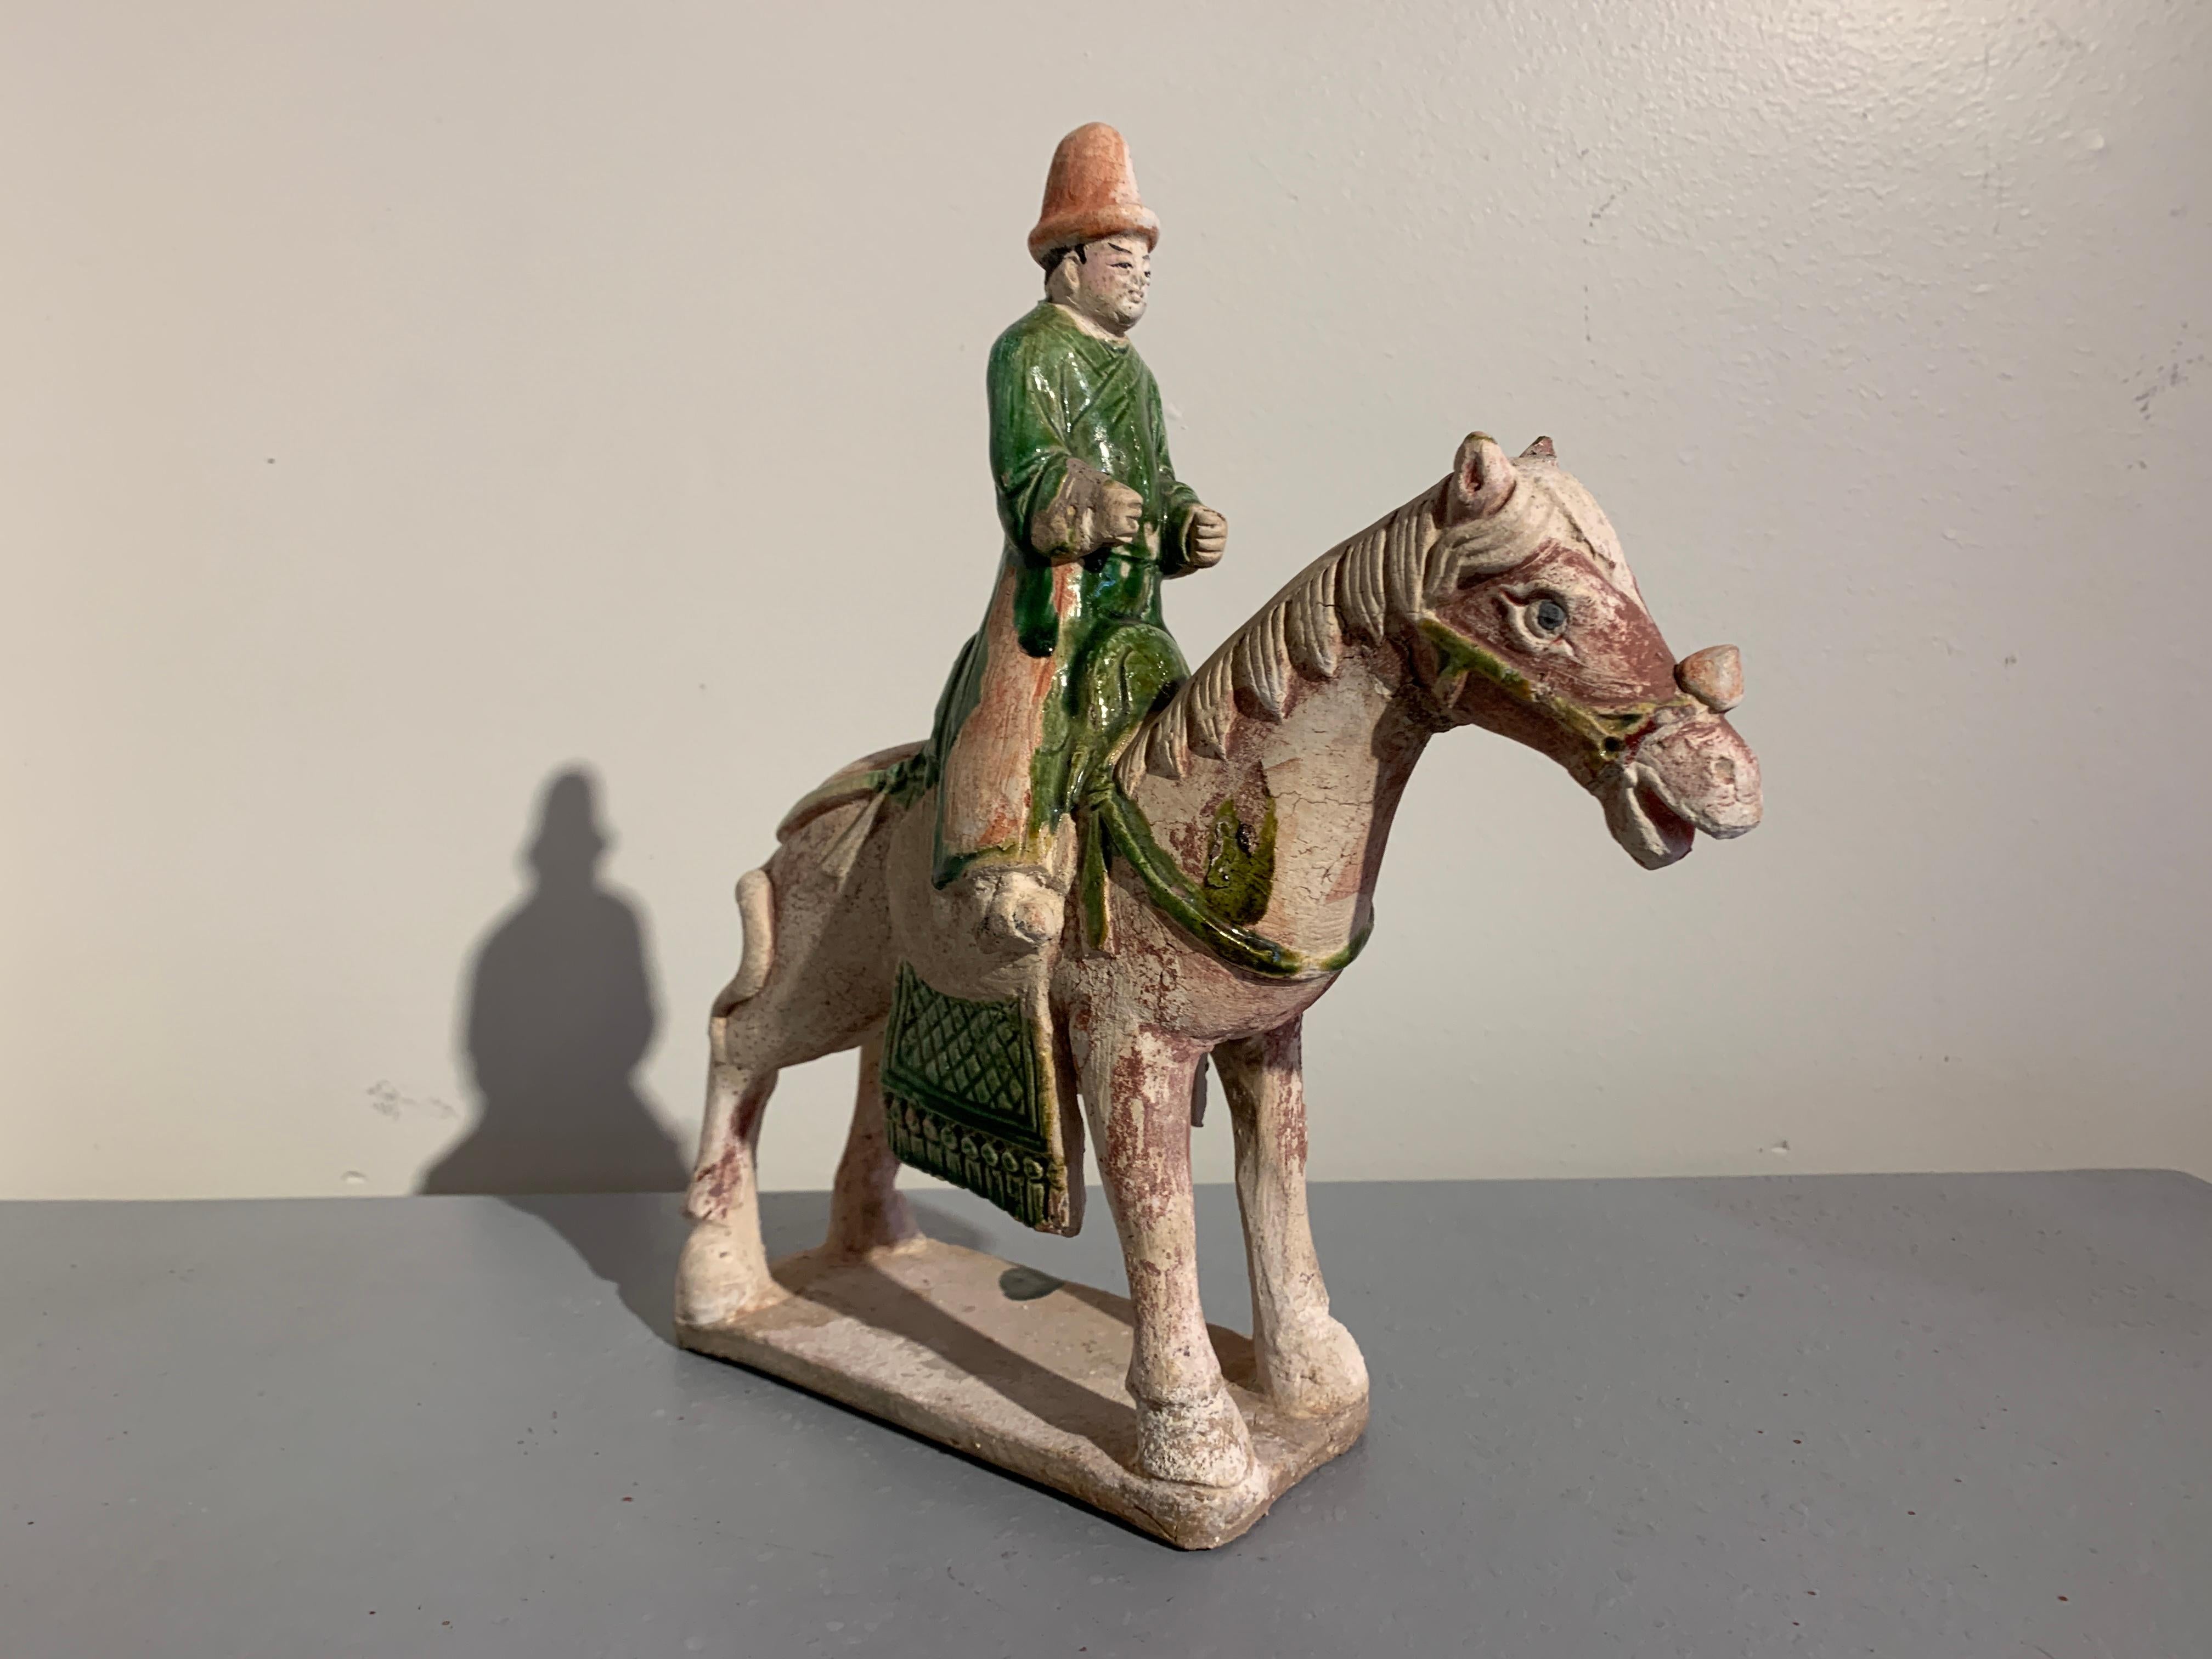 A charming Chinese Ming Dynasty figural group of a horse and rider with an associated attendant, green glazed pottery, Ming Dynasty (1368 to 1644), circa 16th century, China. 

The group comprised of a horse with a mounted rider, and a separate